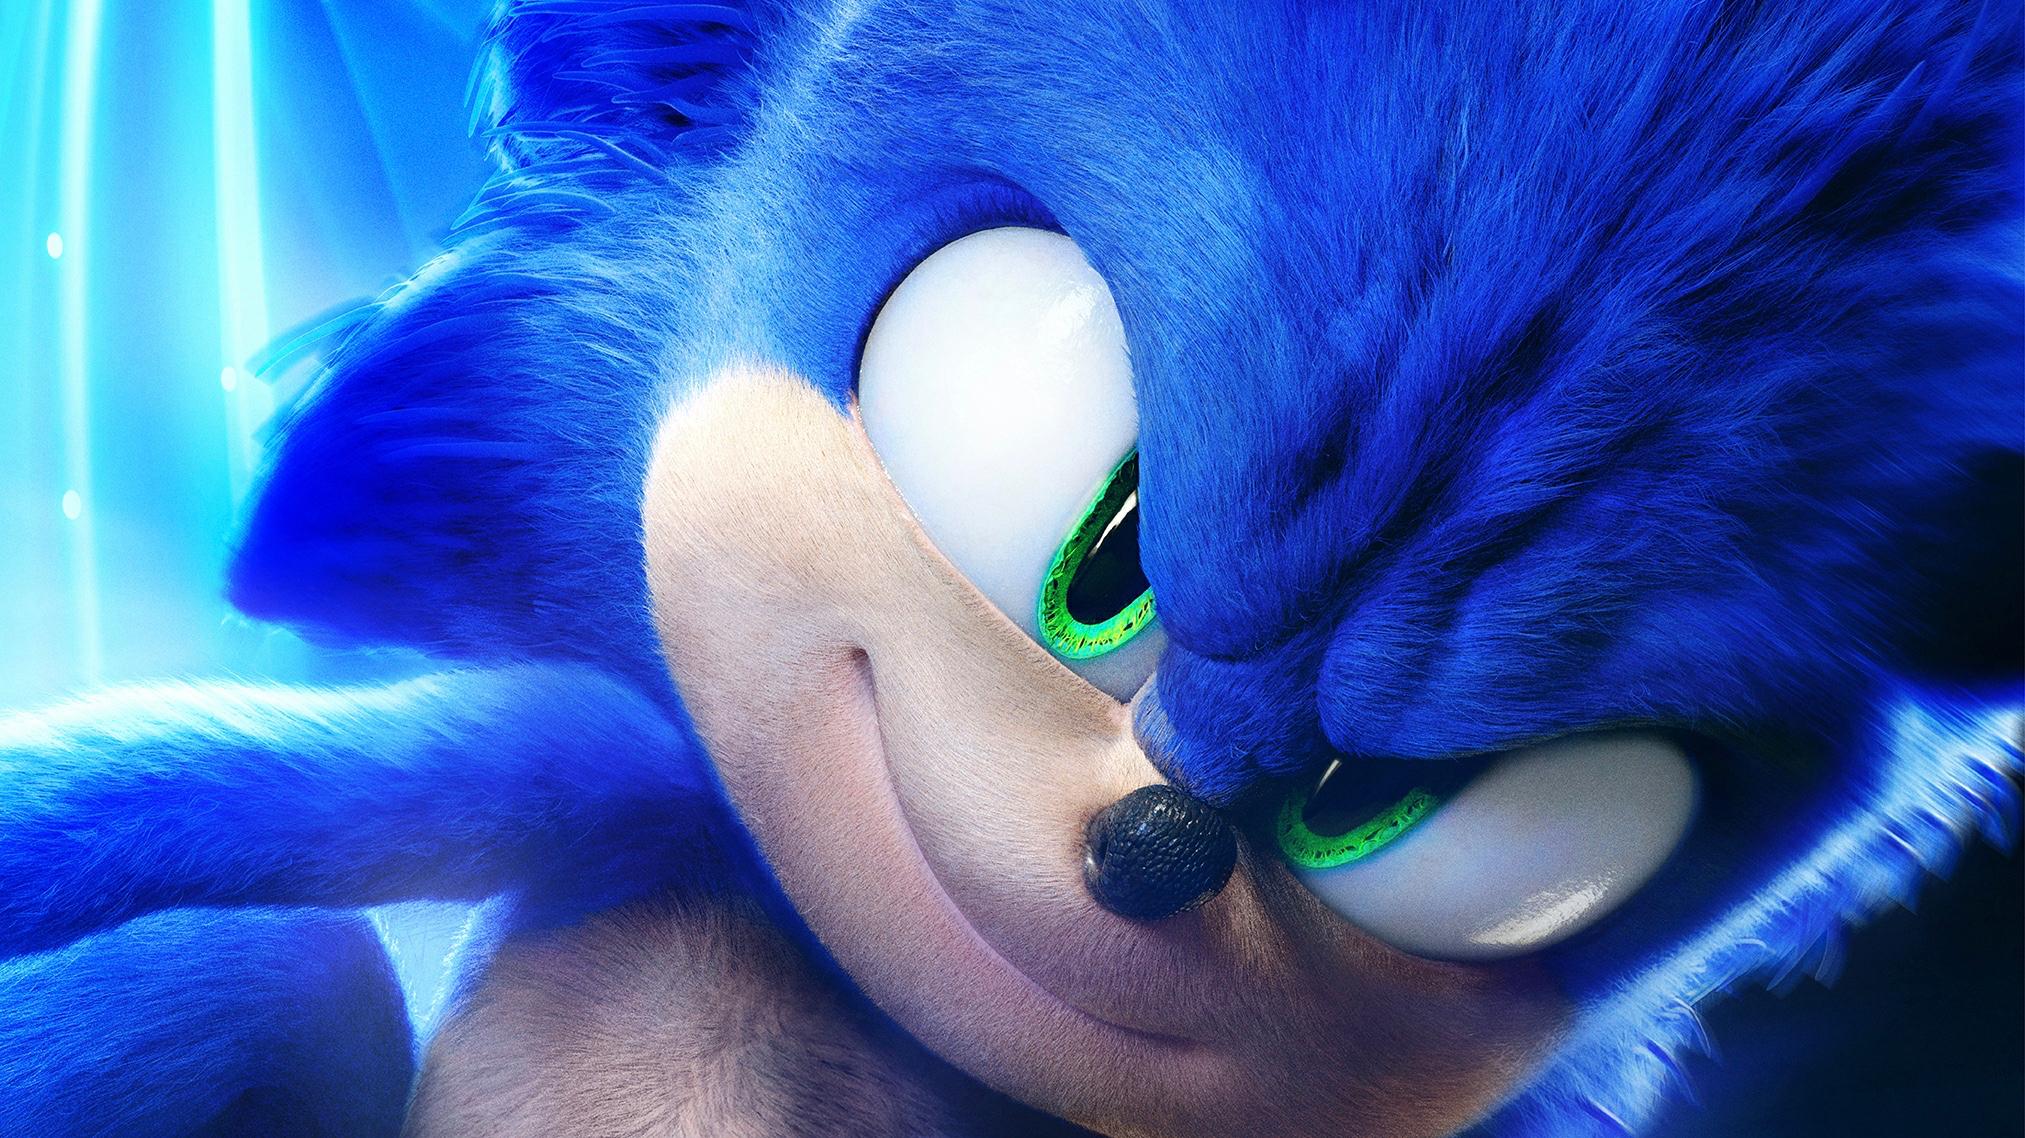 Sonic The Hedgehog HD Wallpaper And Background